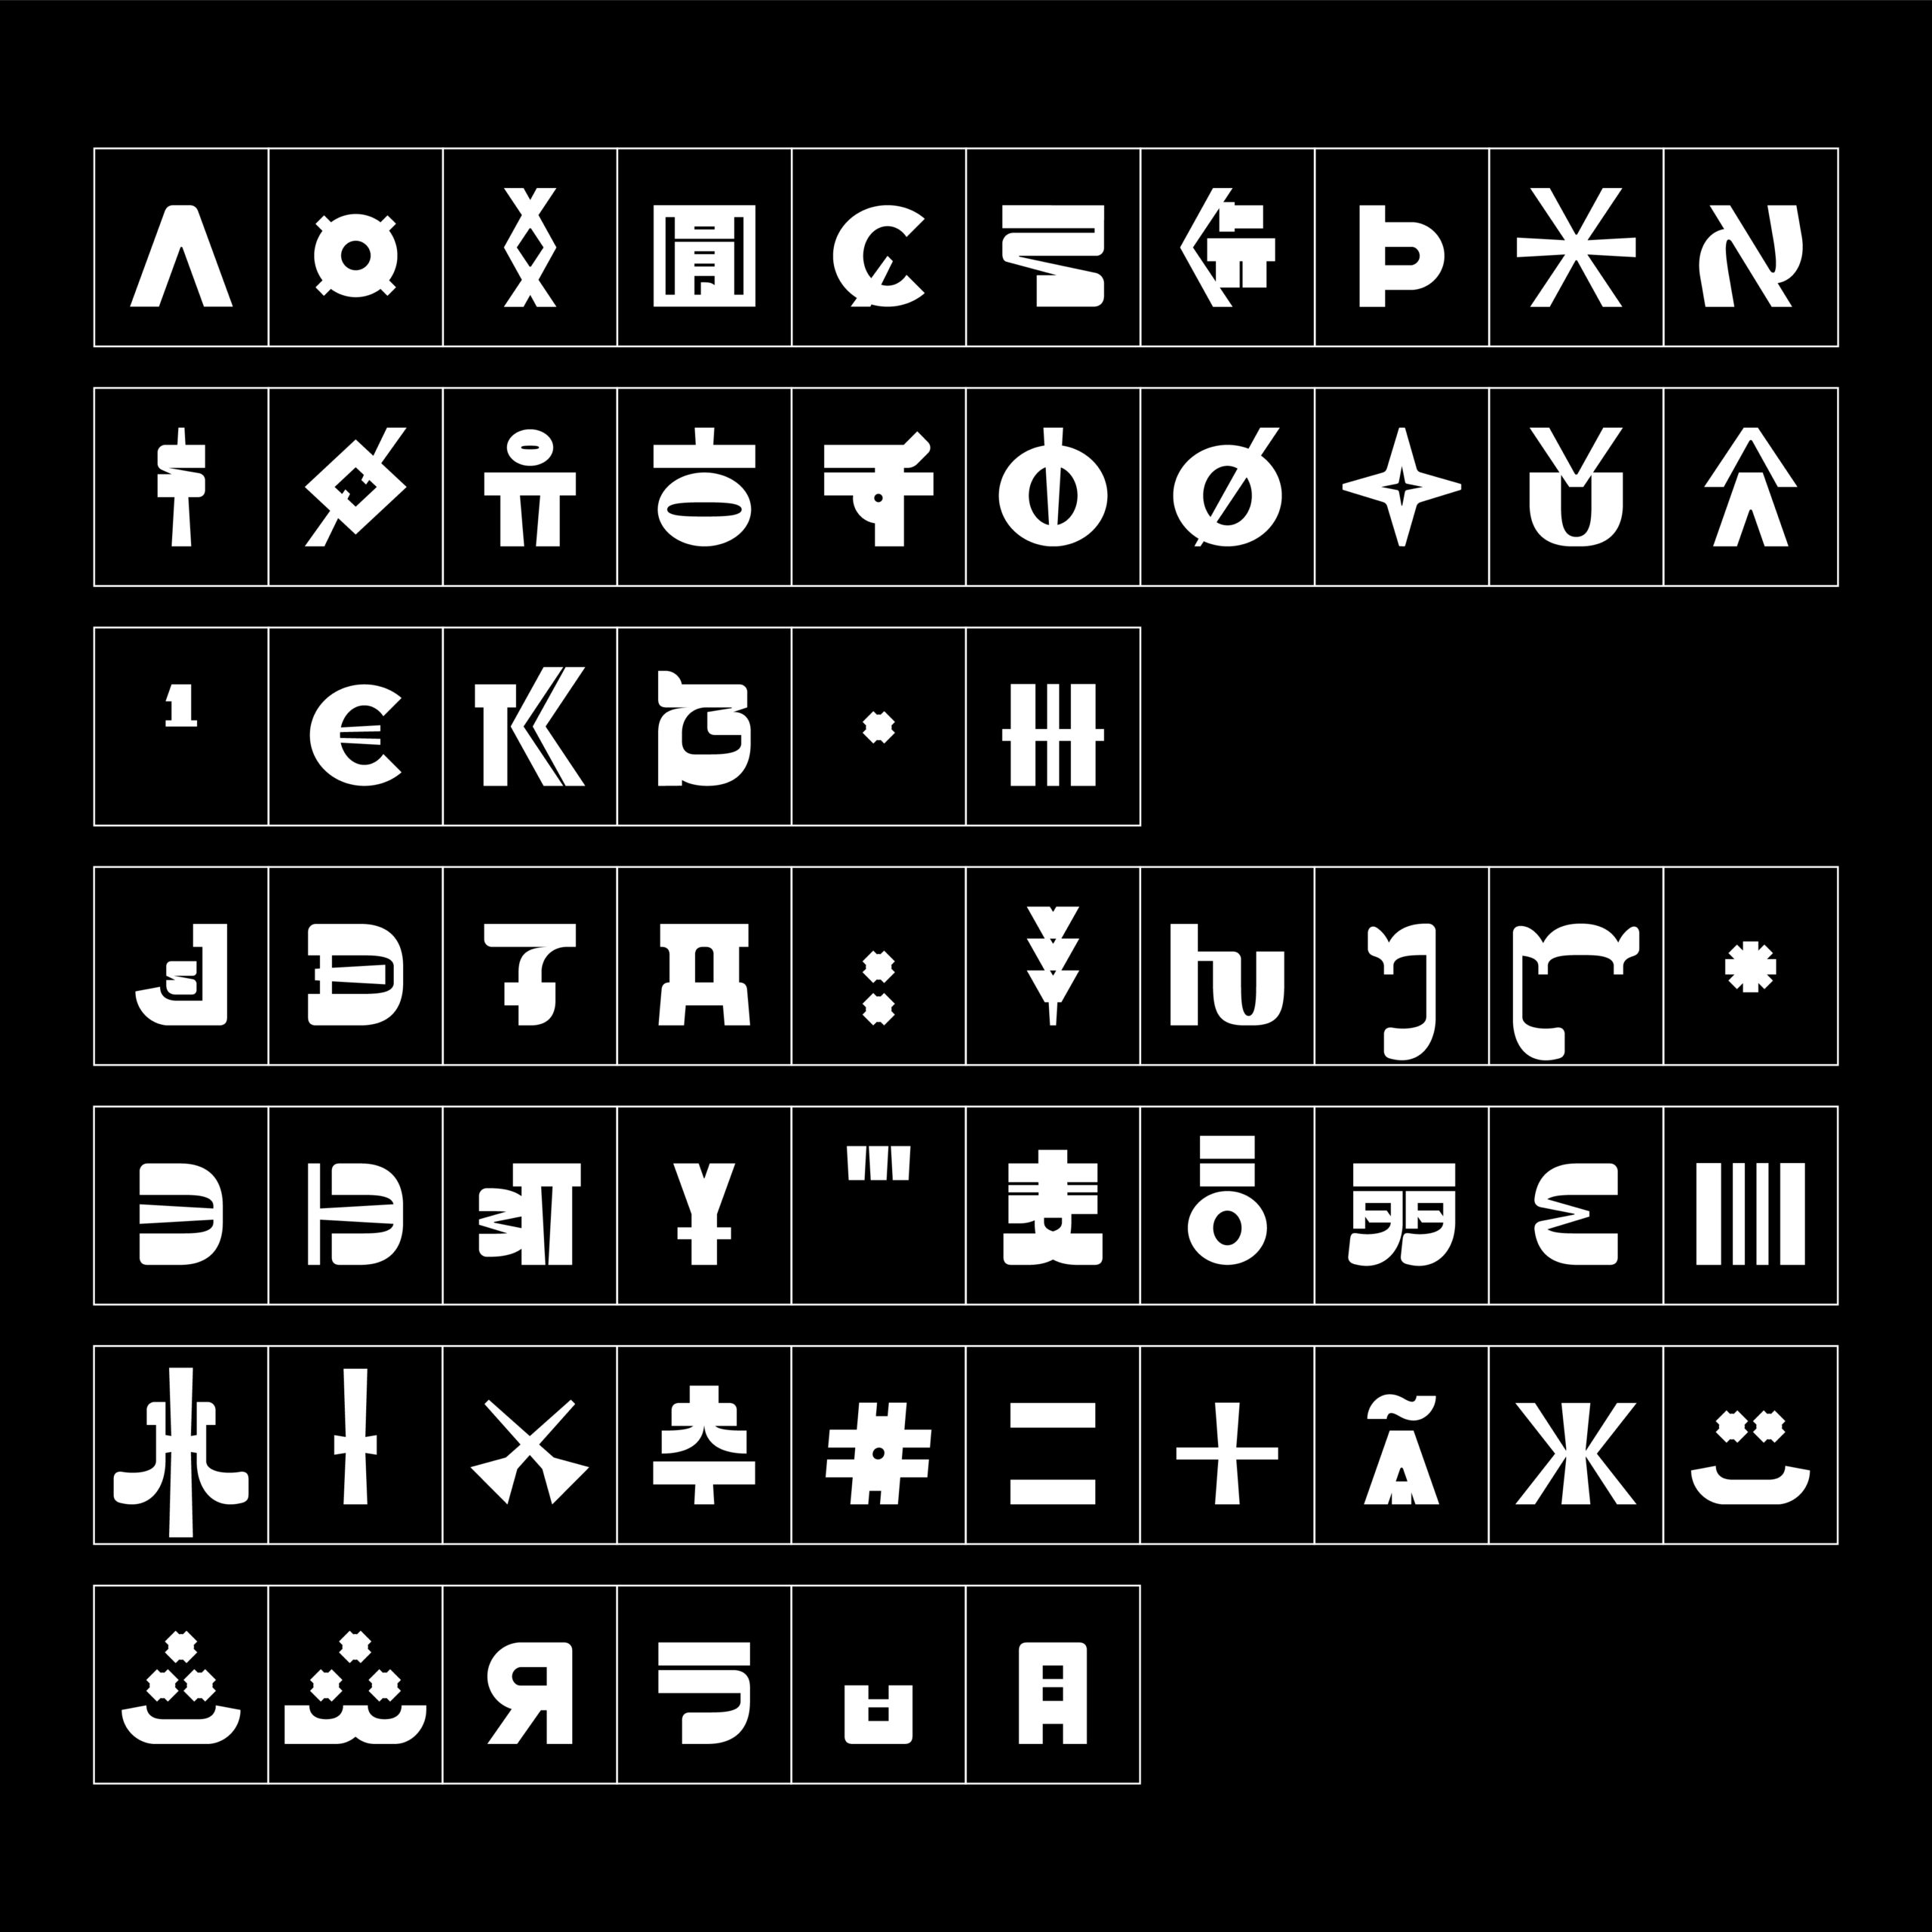 Koiné's character set arranged in a grid.